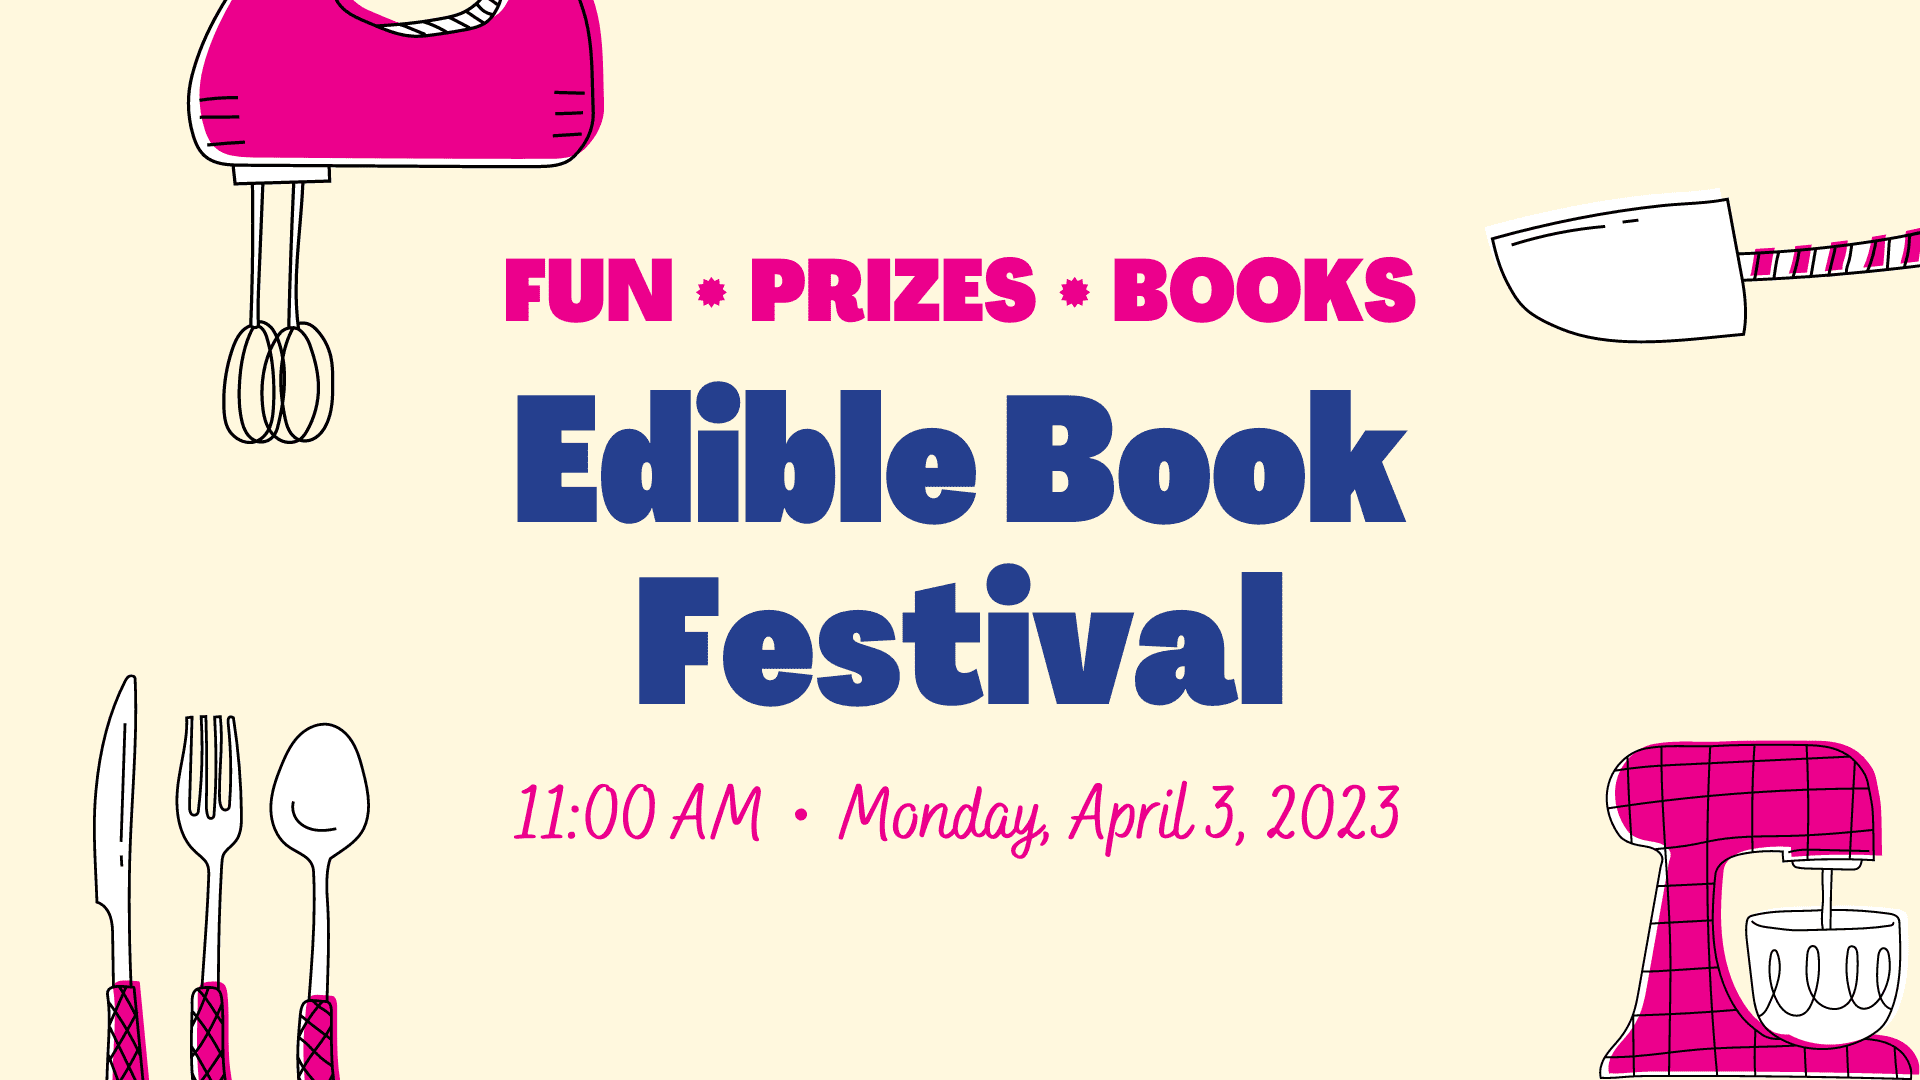 Graphic of different kitchen appliances and tool with the text, "Fun, prizes, books. Edible Book Festival 11:00 AM, Monday, April 3, 2023."